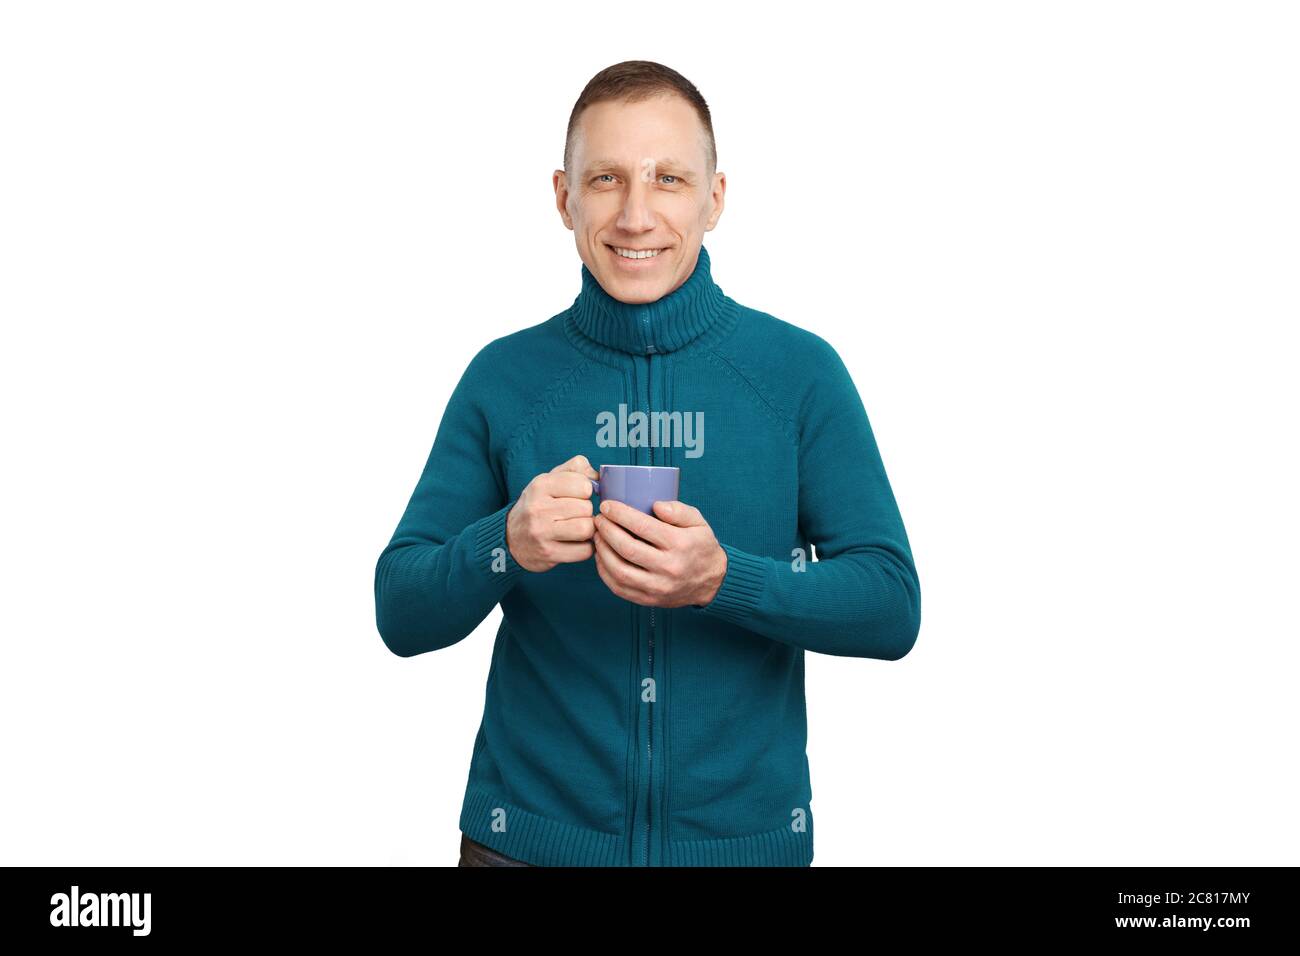 Smiling average age man in blue sweater isolated on white background holding a blue cup of coffee. Stock Photo